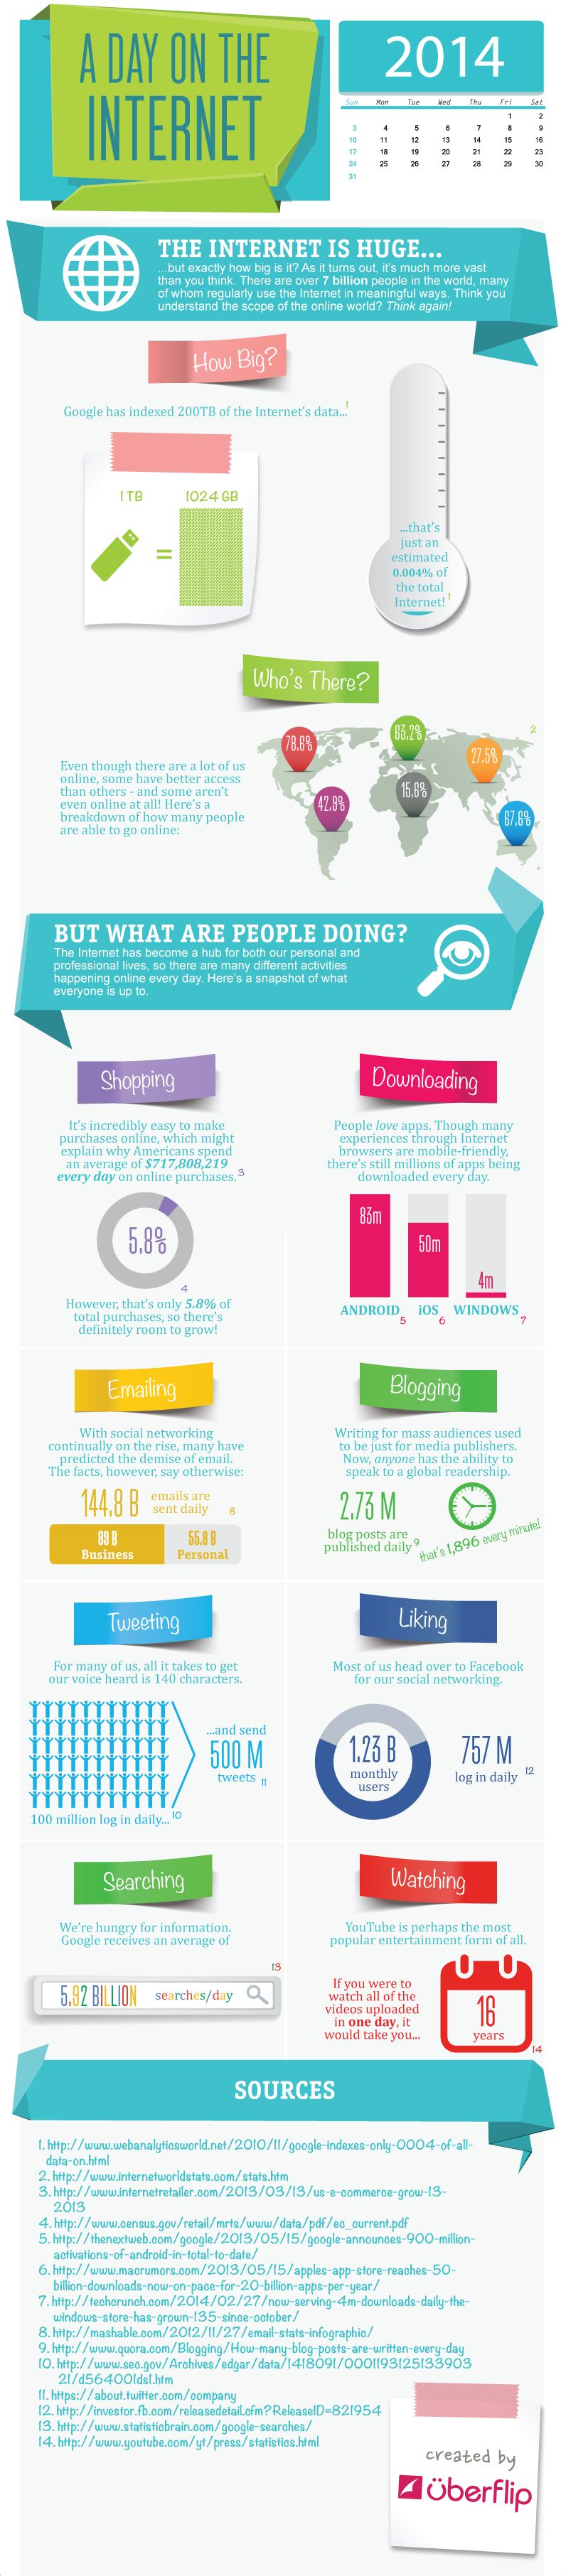 A Day In The Life Of The #SocialMedia in 2014 - #Infographic #Facebook #Twitter